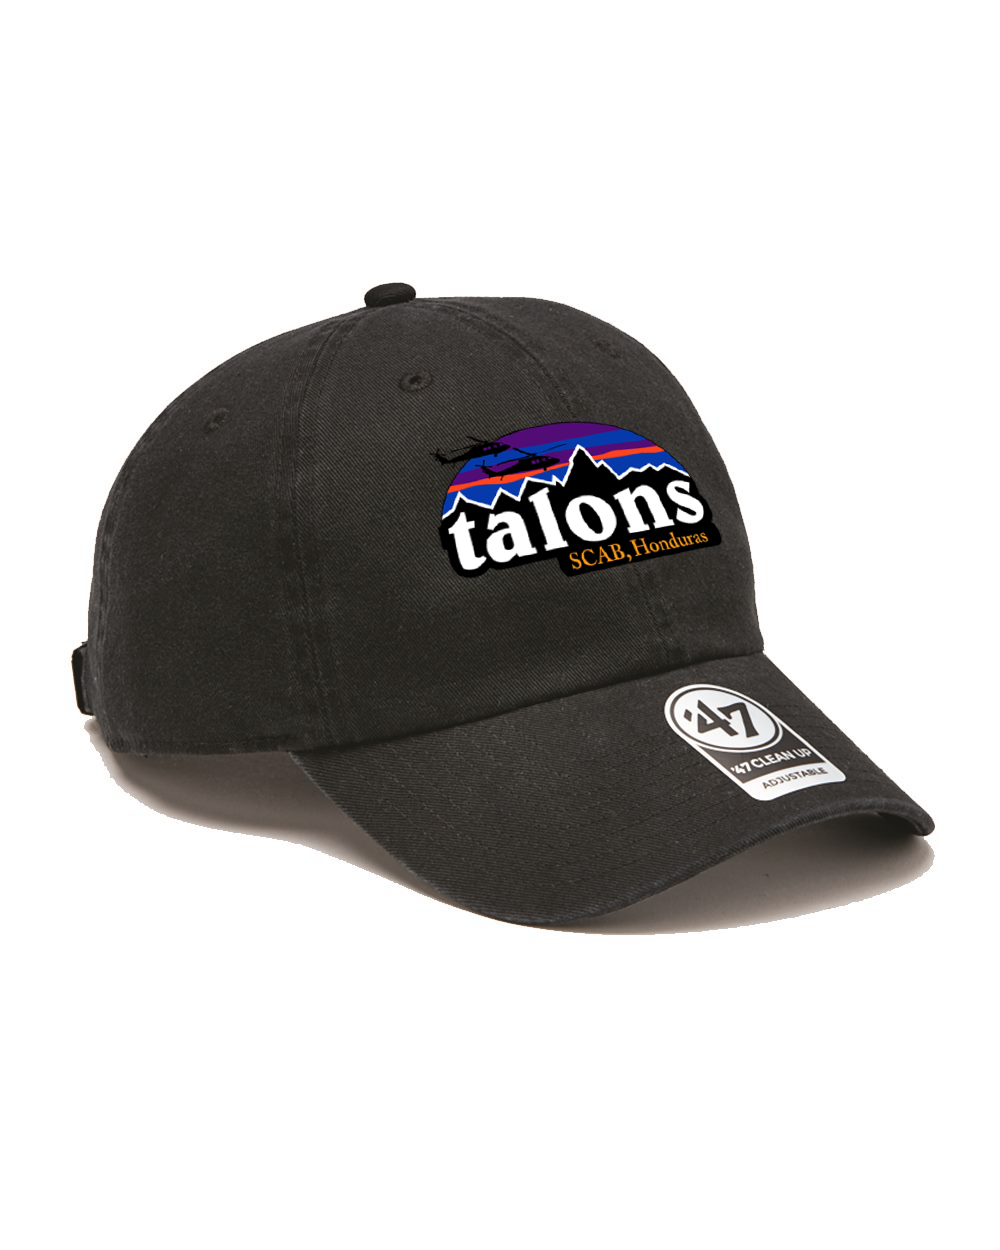 1-228 Talons - Embroidered Hat